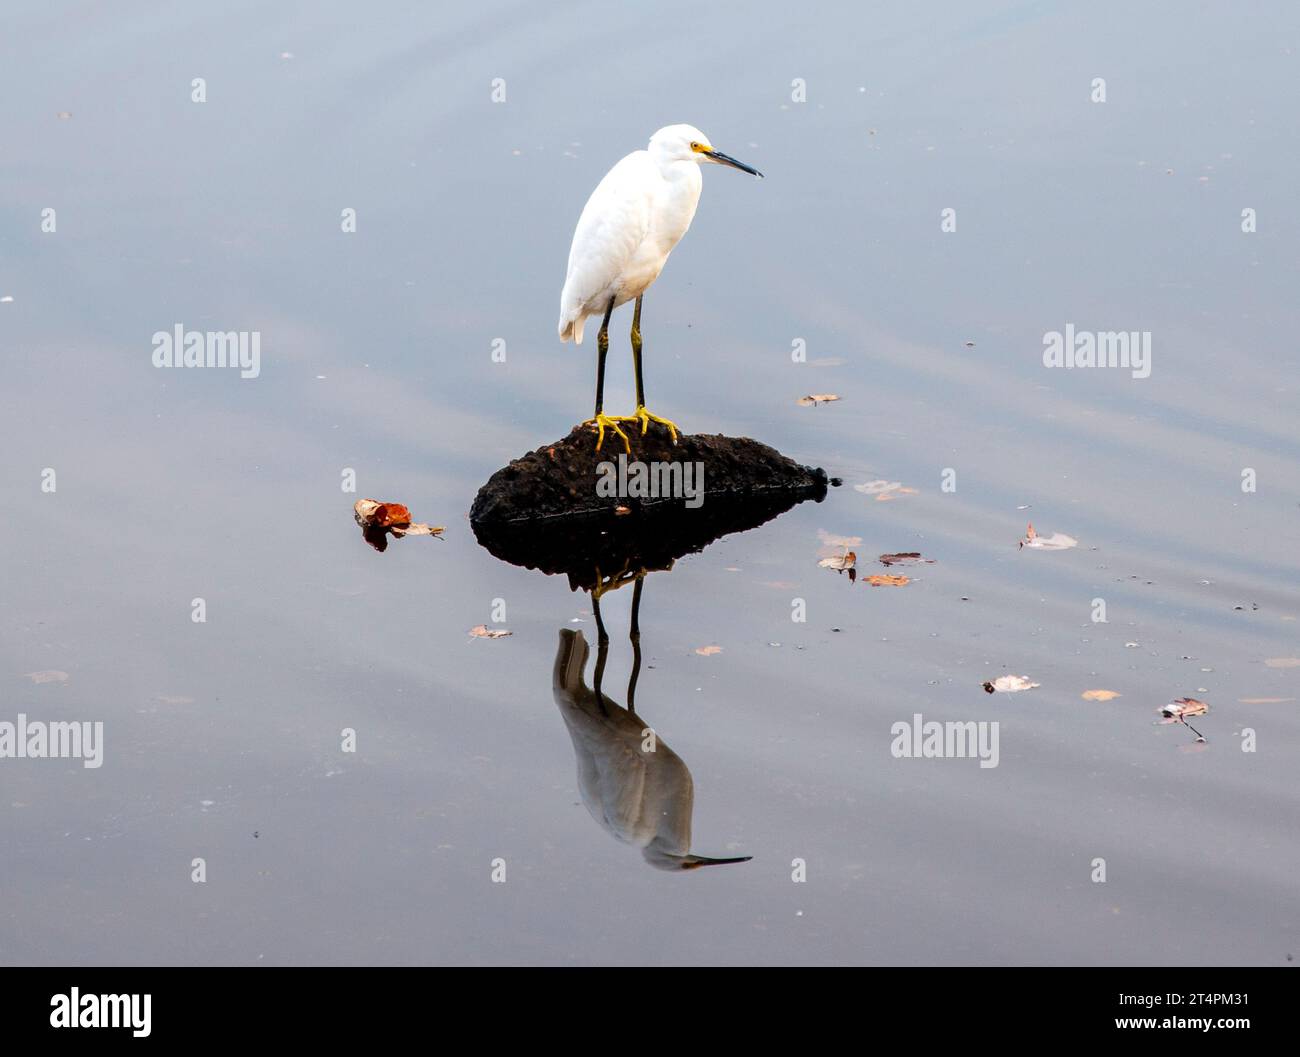 Potrait of a Young white heron crane standing on a rock with its full reflection in the water of Southards Pond on Long Island New York. Stock Photo